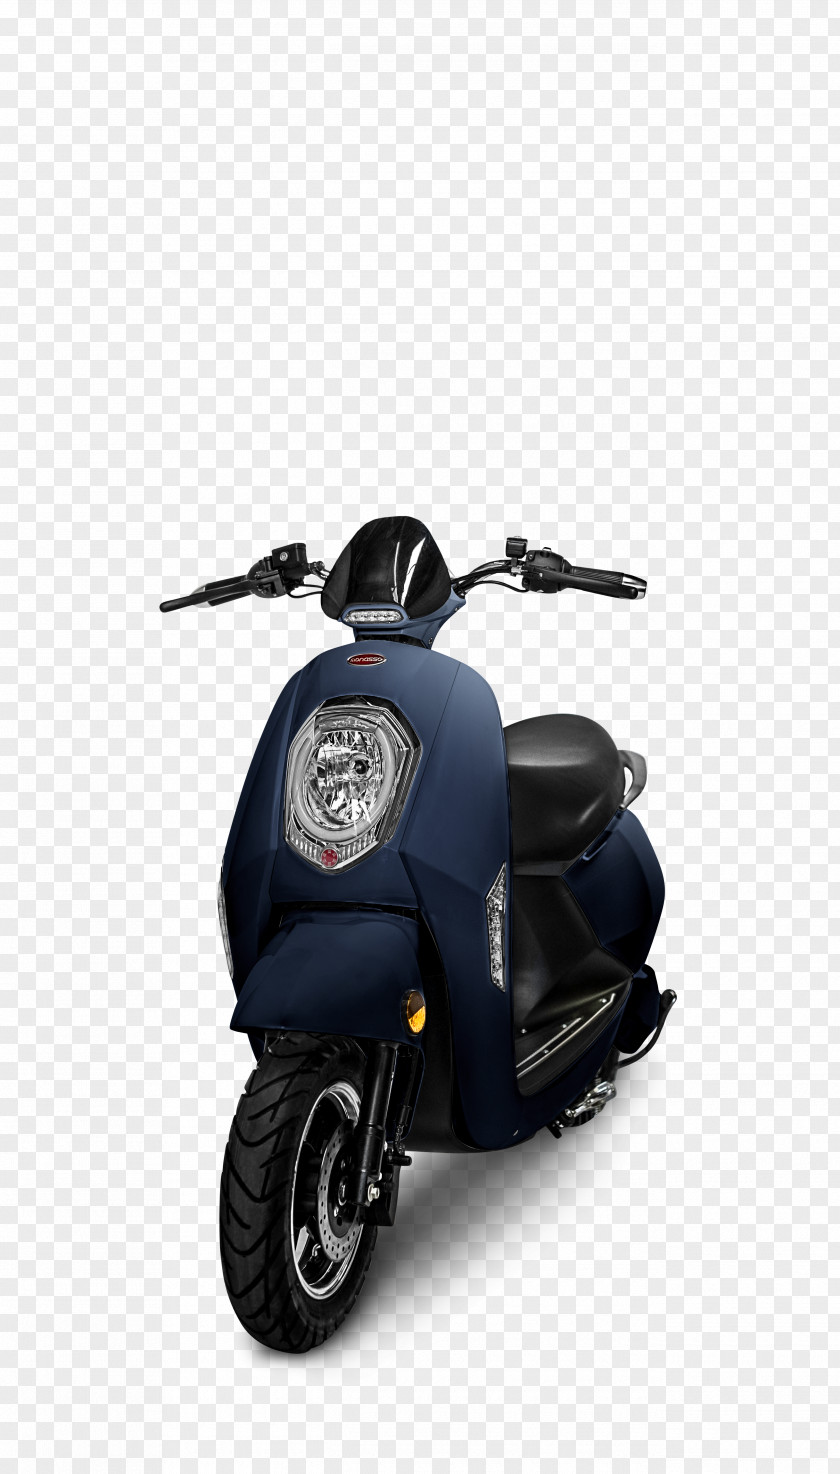 Scooter Electric Motorcycles And Scooters Monasso Elektromotorroller Snorscooter PNG